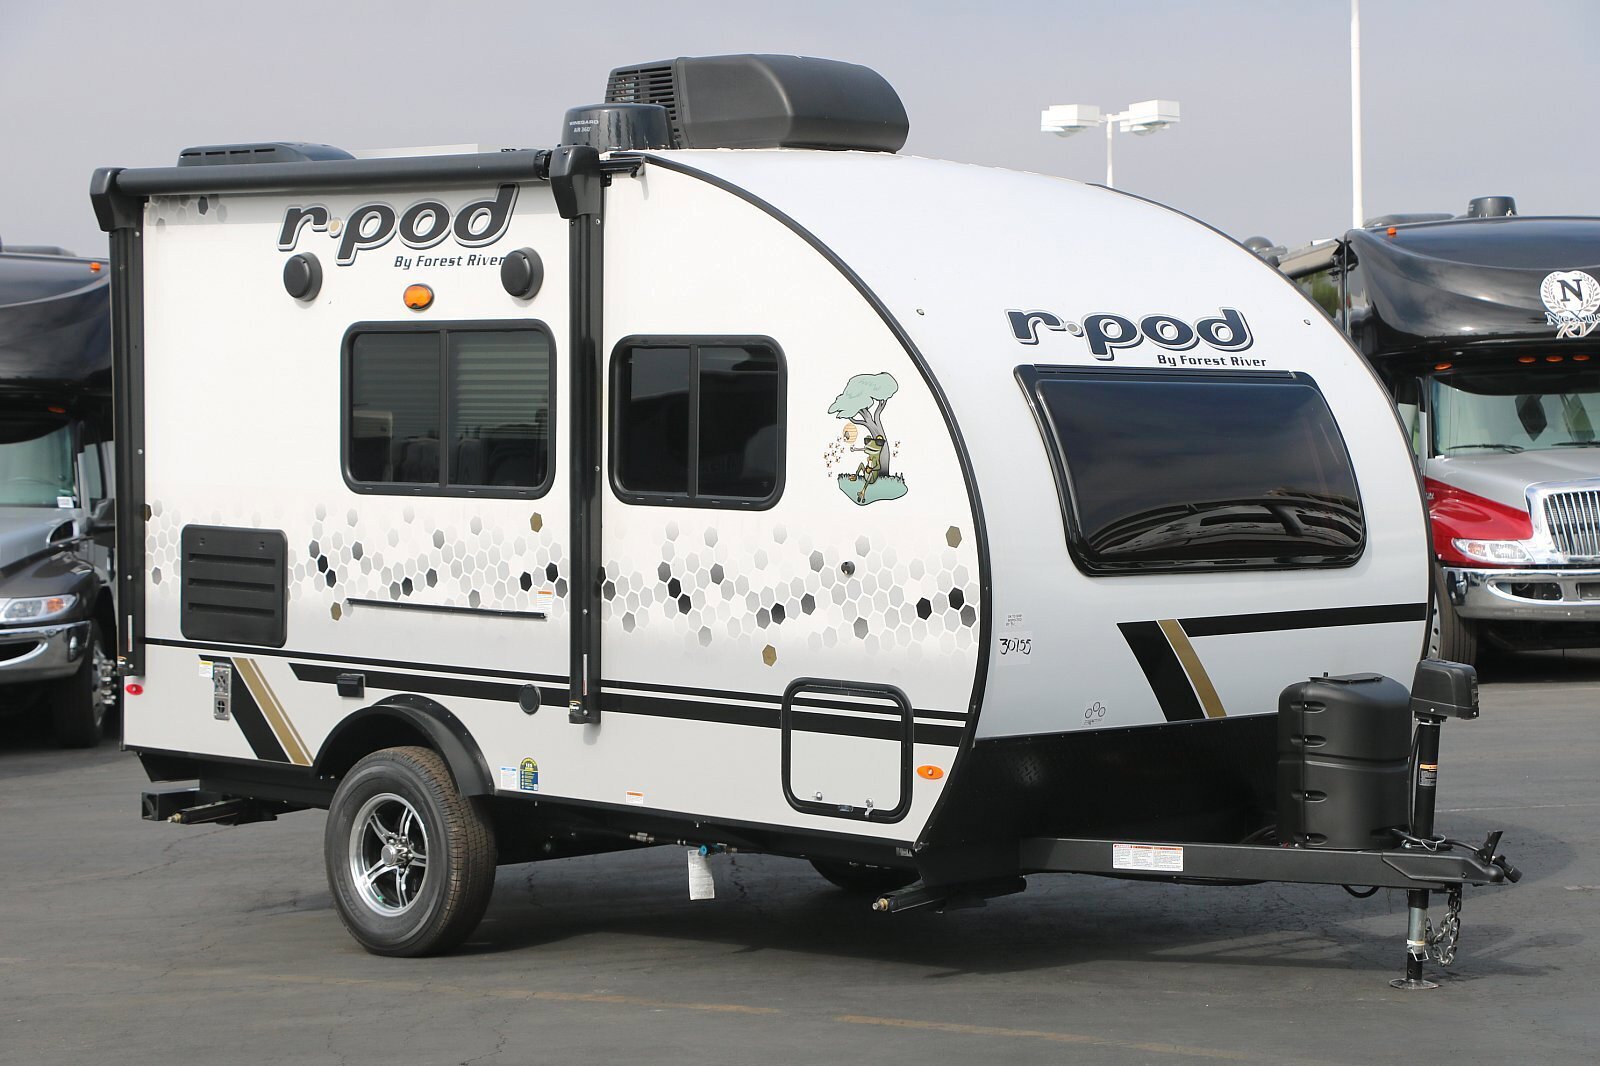 2022 FOREST RIVER R-POD RP153